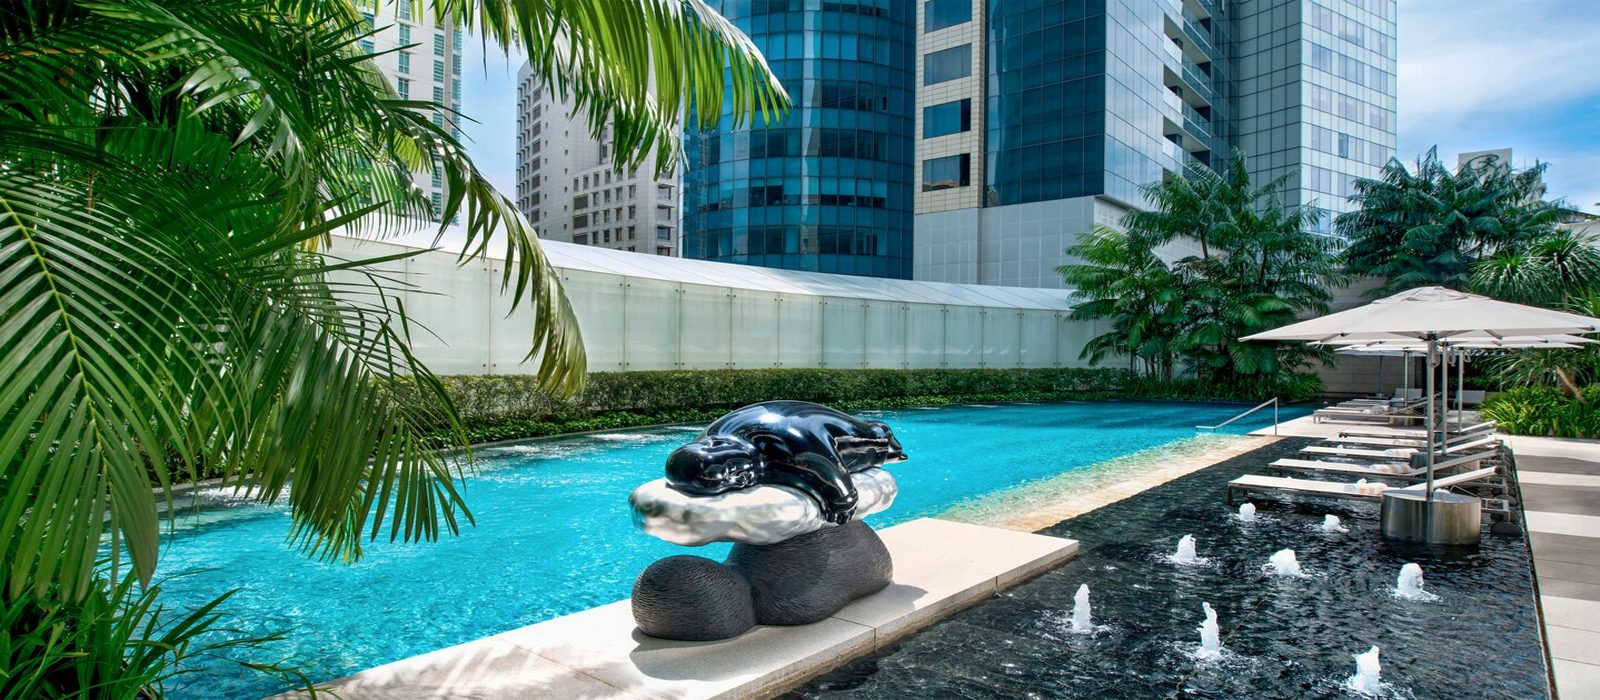 Luxury Singapore Holiday Packages The St Regis Singapore Header 1